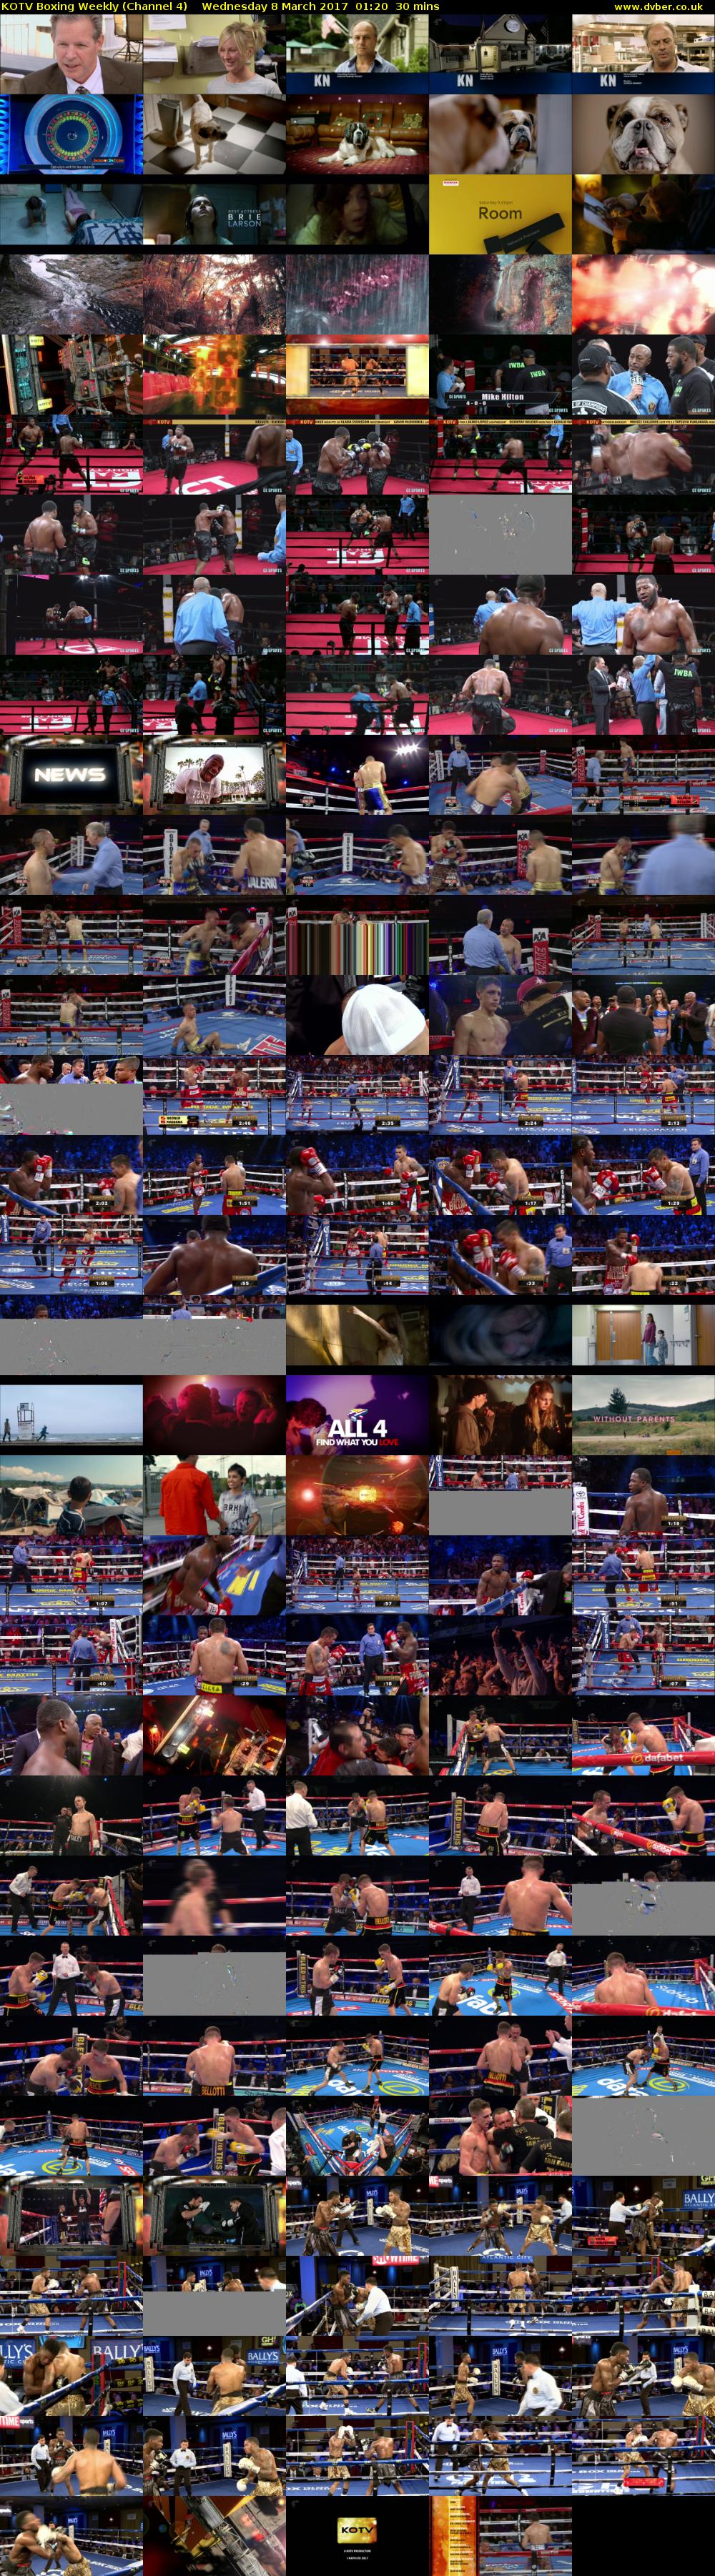 KOTV Boxing Weekly (Channel 4) Wednesday 8 March 2017 01:20 - 01:50